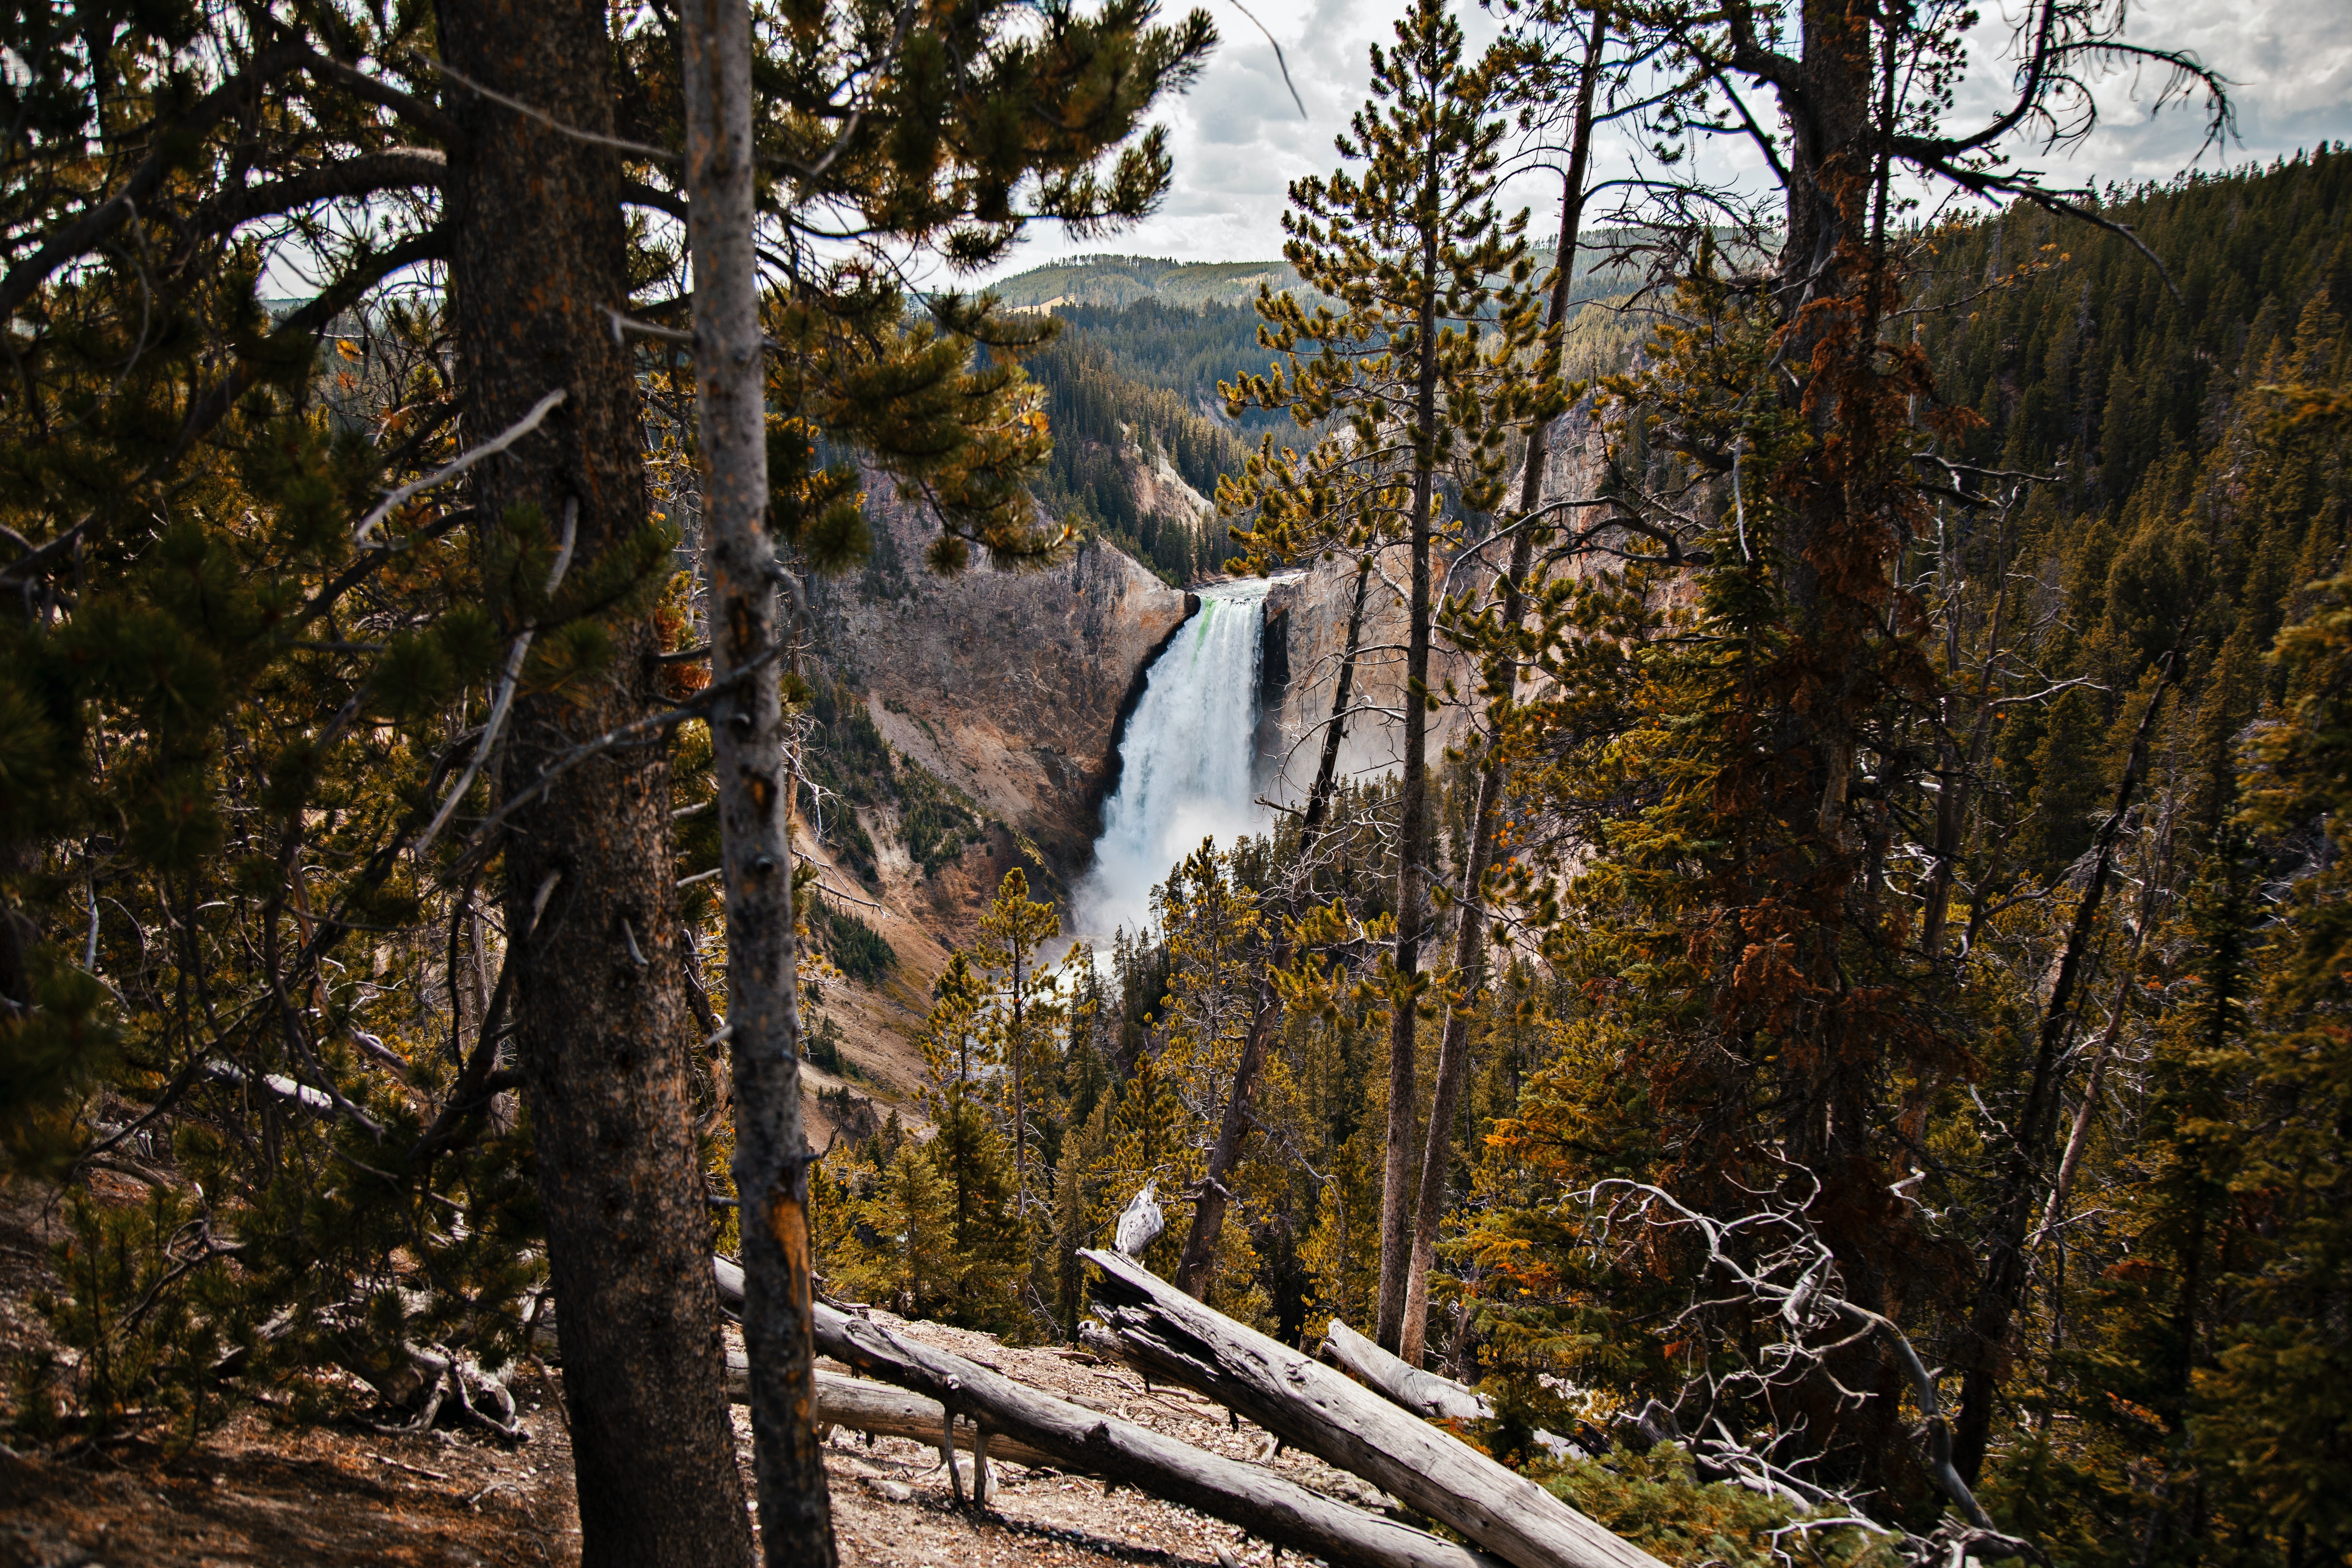 ENTRANCE FEE OF YELLOWSTONE NATIONAL PARK